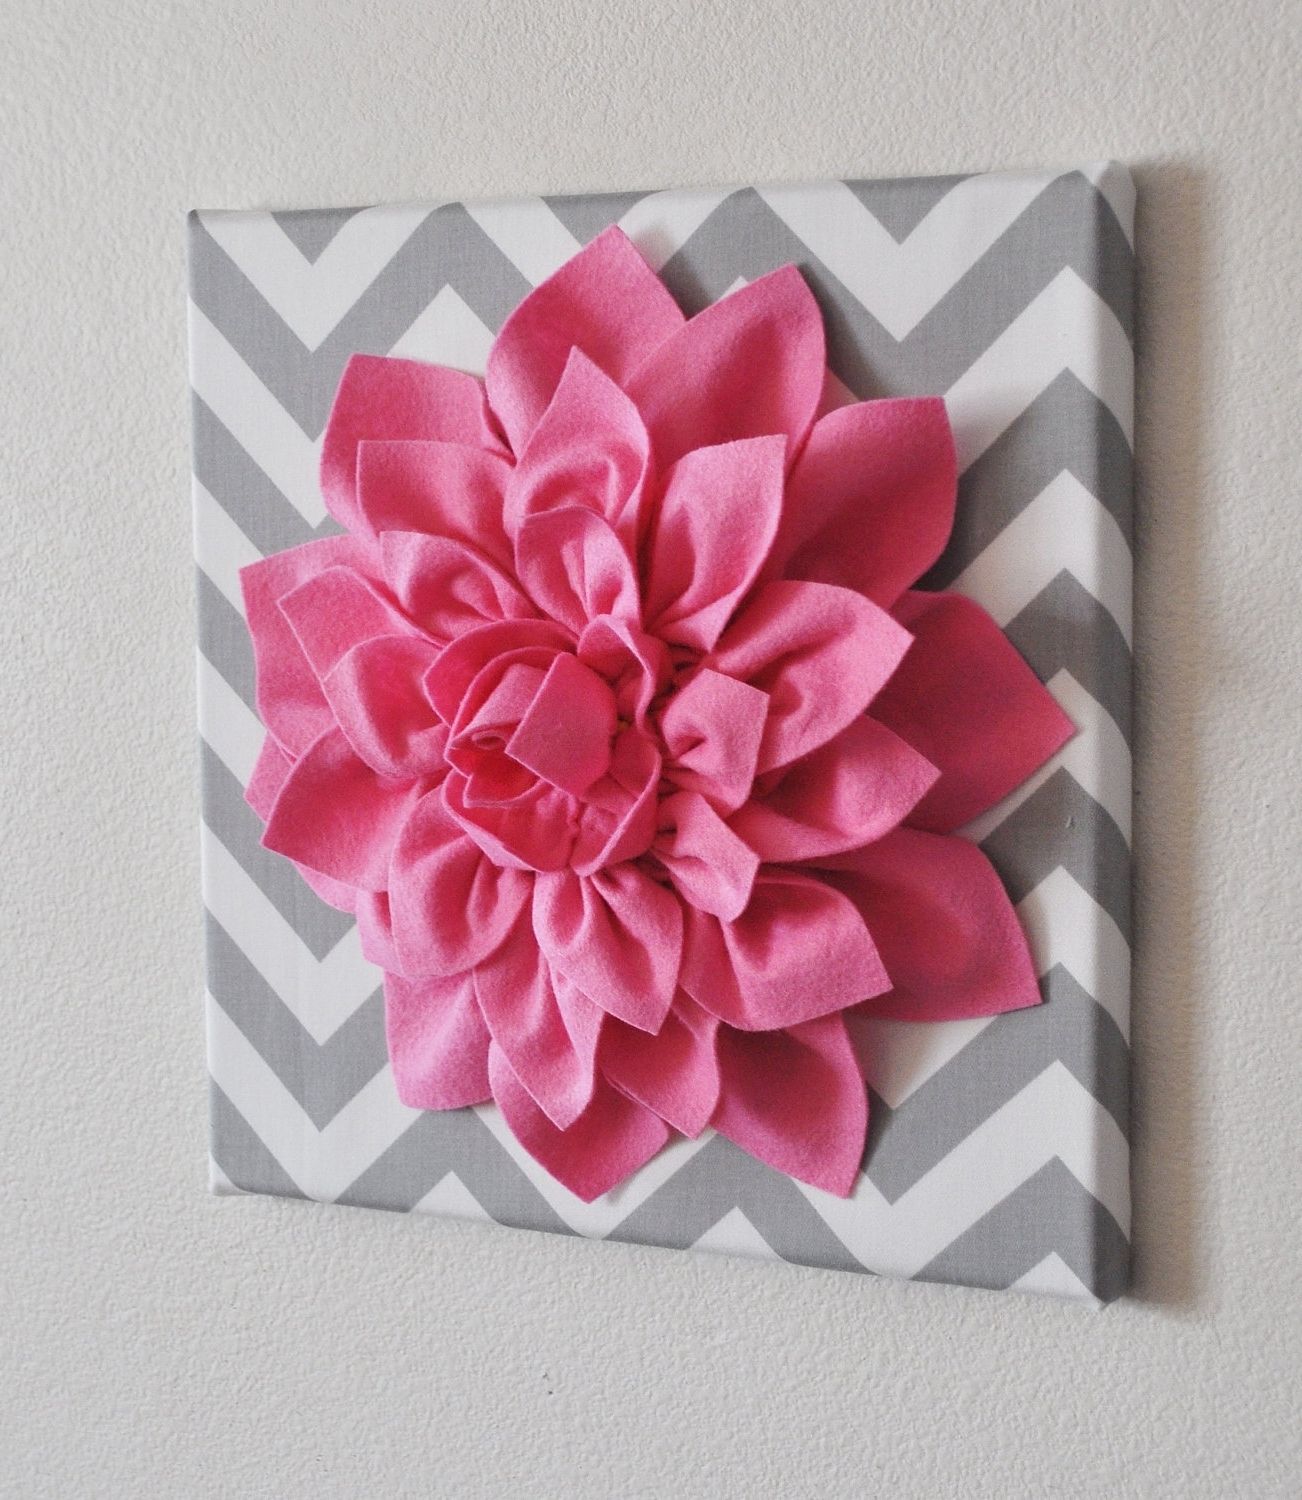 Pink And White Wall Art Throughout Fashionable Pink Wall Flower  Bright Pink Dahlia On Gray And White Chevron  (View 4 of 15)